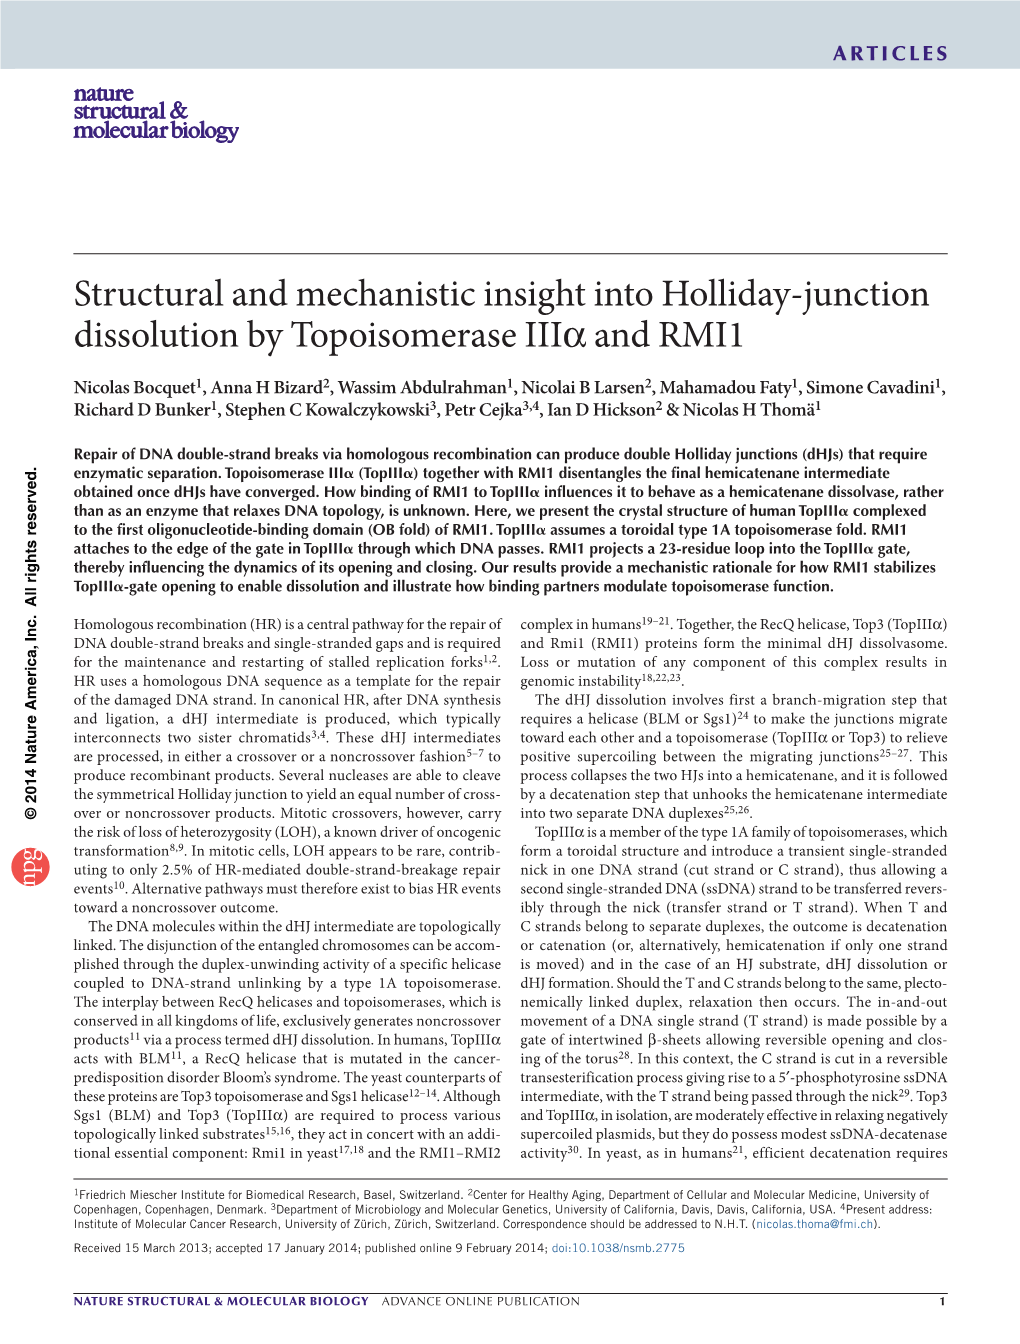 Structural and Mechanistic Insight Into Holliday-Junction Dissolution By